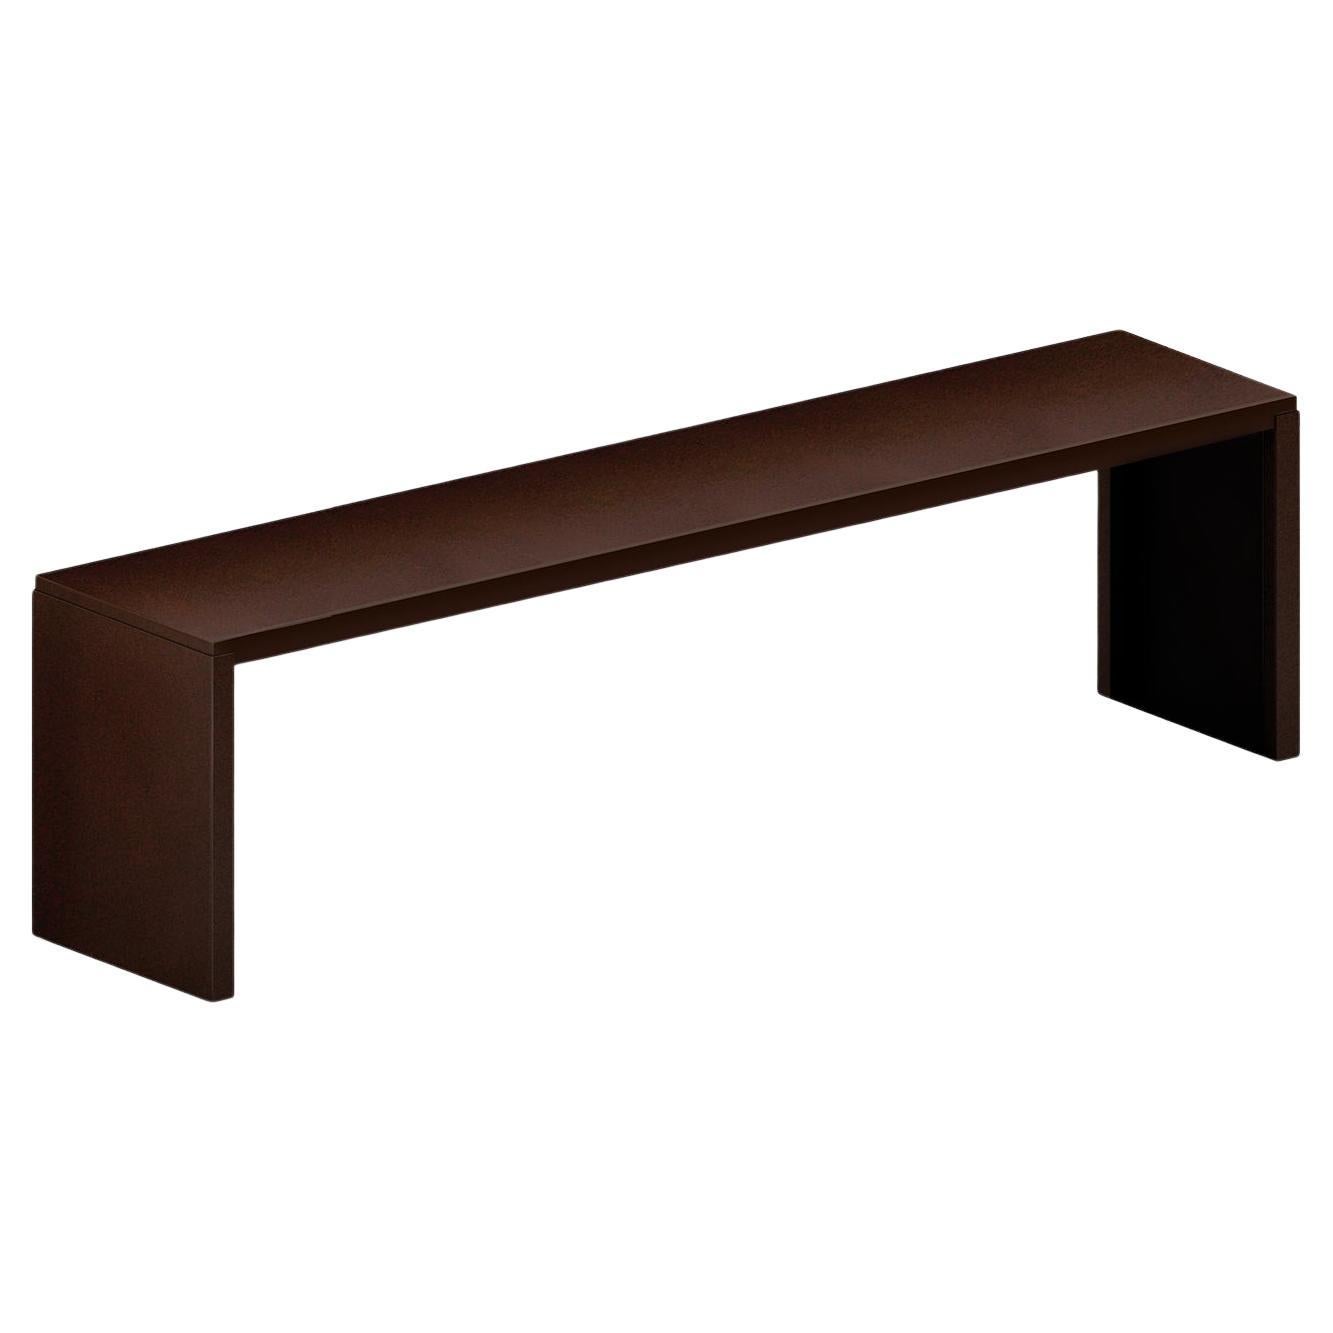 Big Irony Brown Outdoor Bench by Maurizio Peregalli For Sale